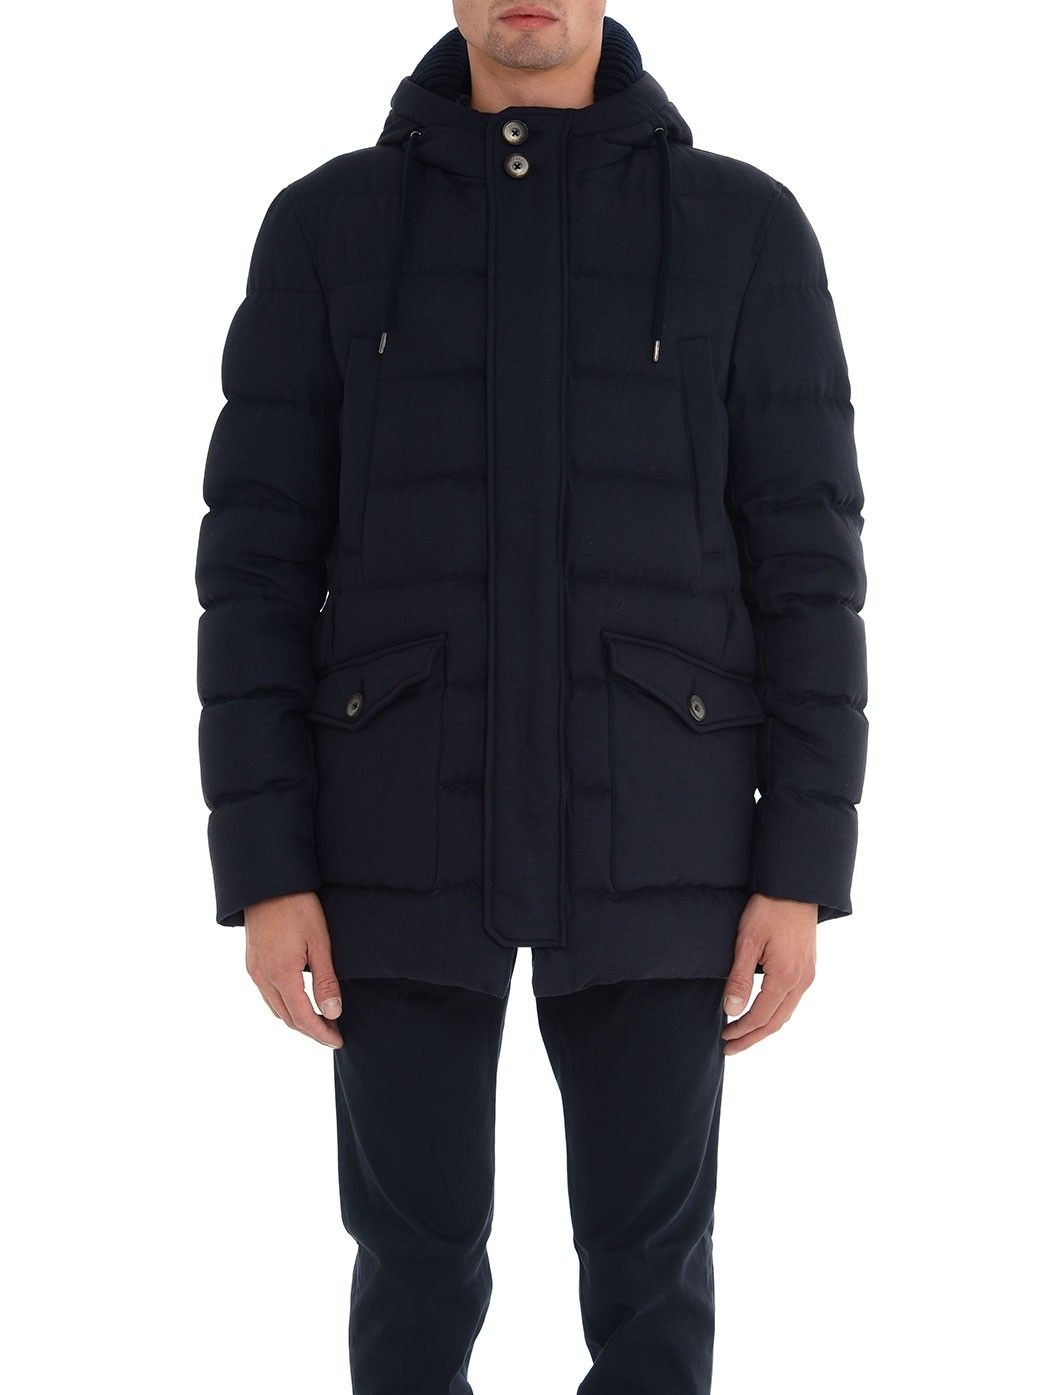  MAN COLLECTION,FALL WINTER,CHURCH'S,MONCLER,MONCLER GRENOBLE,HERNO,WOOLRICH,MSGM,NEIL BARRETT,STONE ISLAND,BLUNDSTONE  HERNO PI000907U-33278